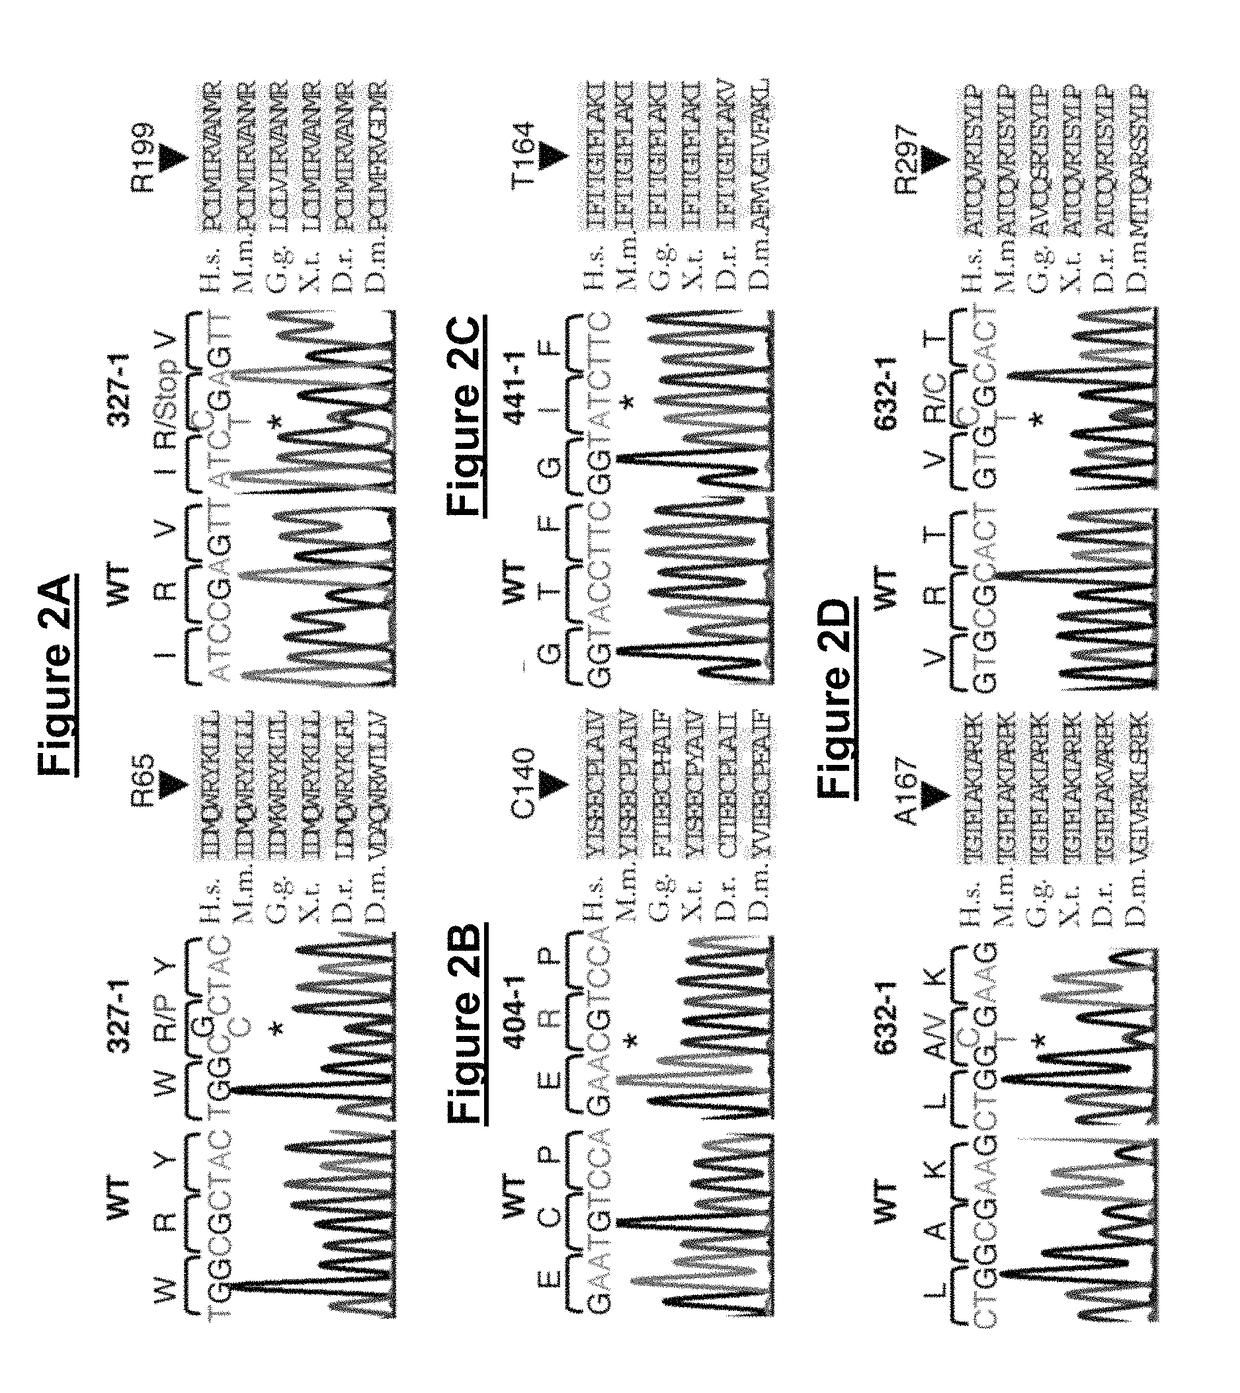 Loss of function mutations in KCNJ10 cause SeSAME, a human syndrome with sensory, neurological, and renal deficits